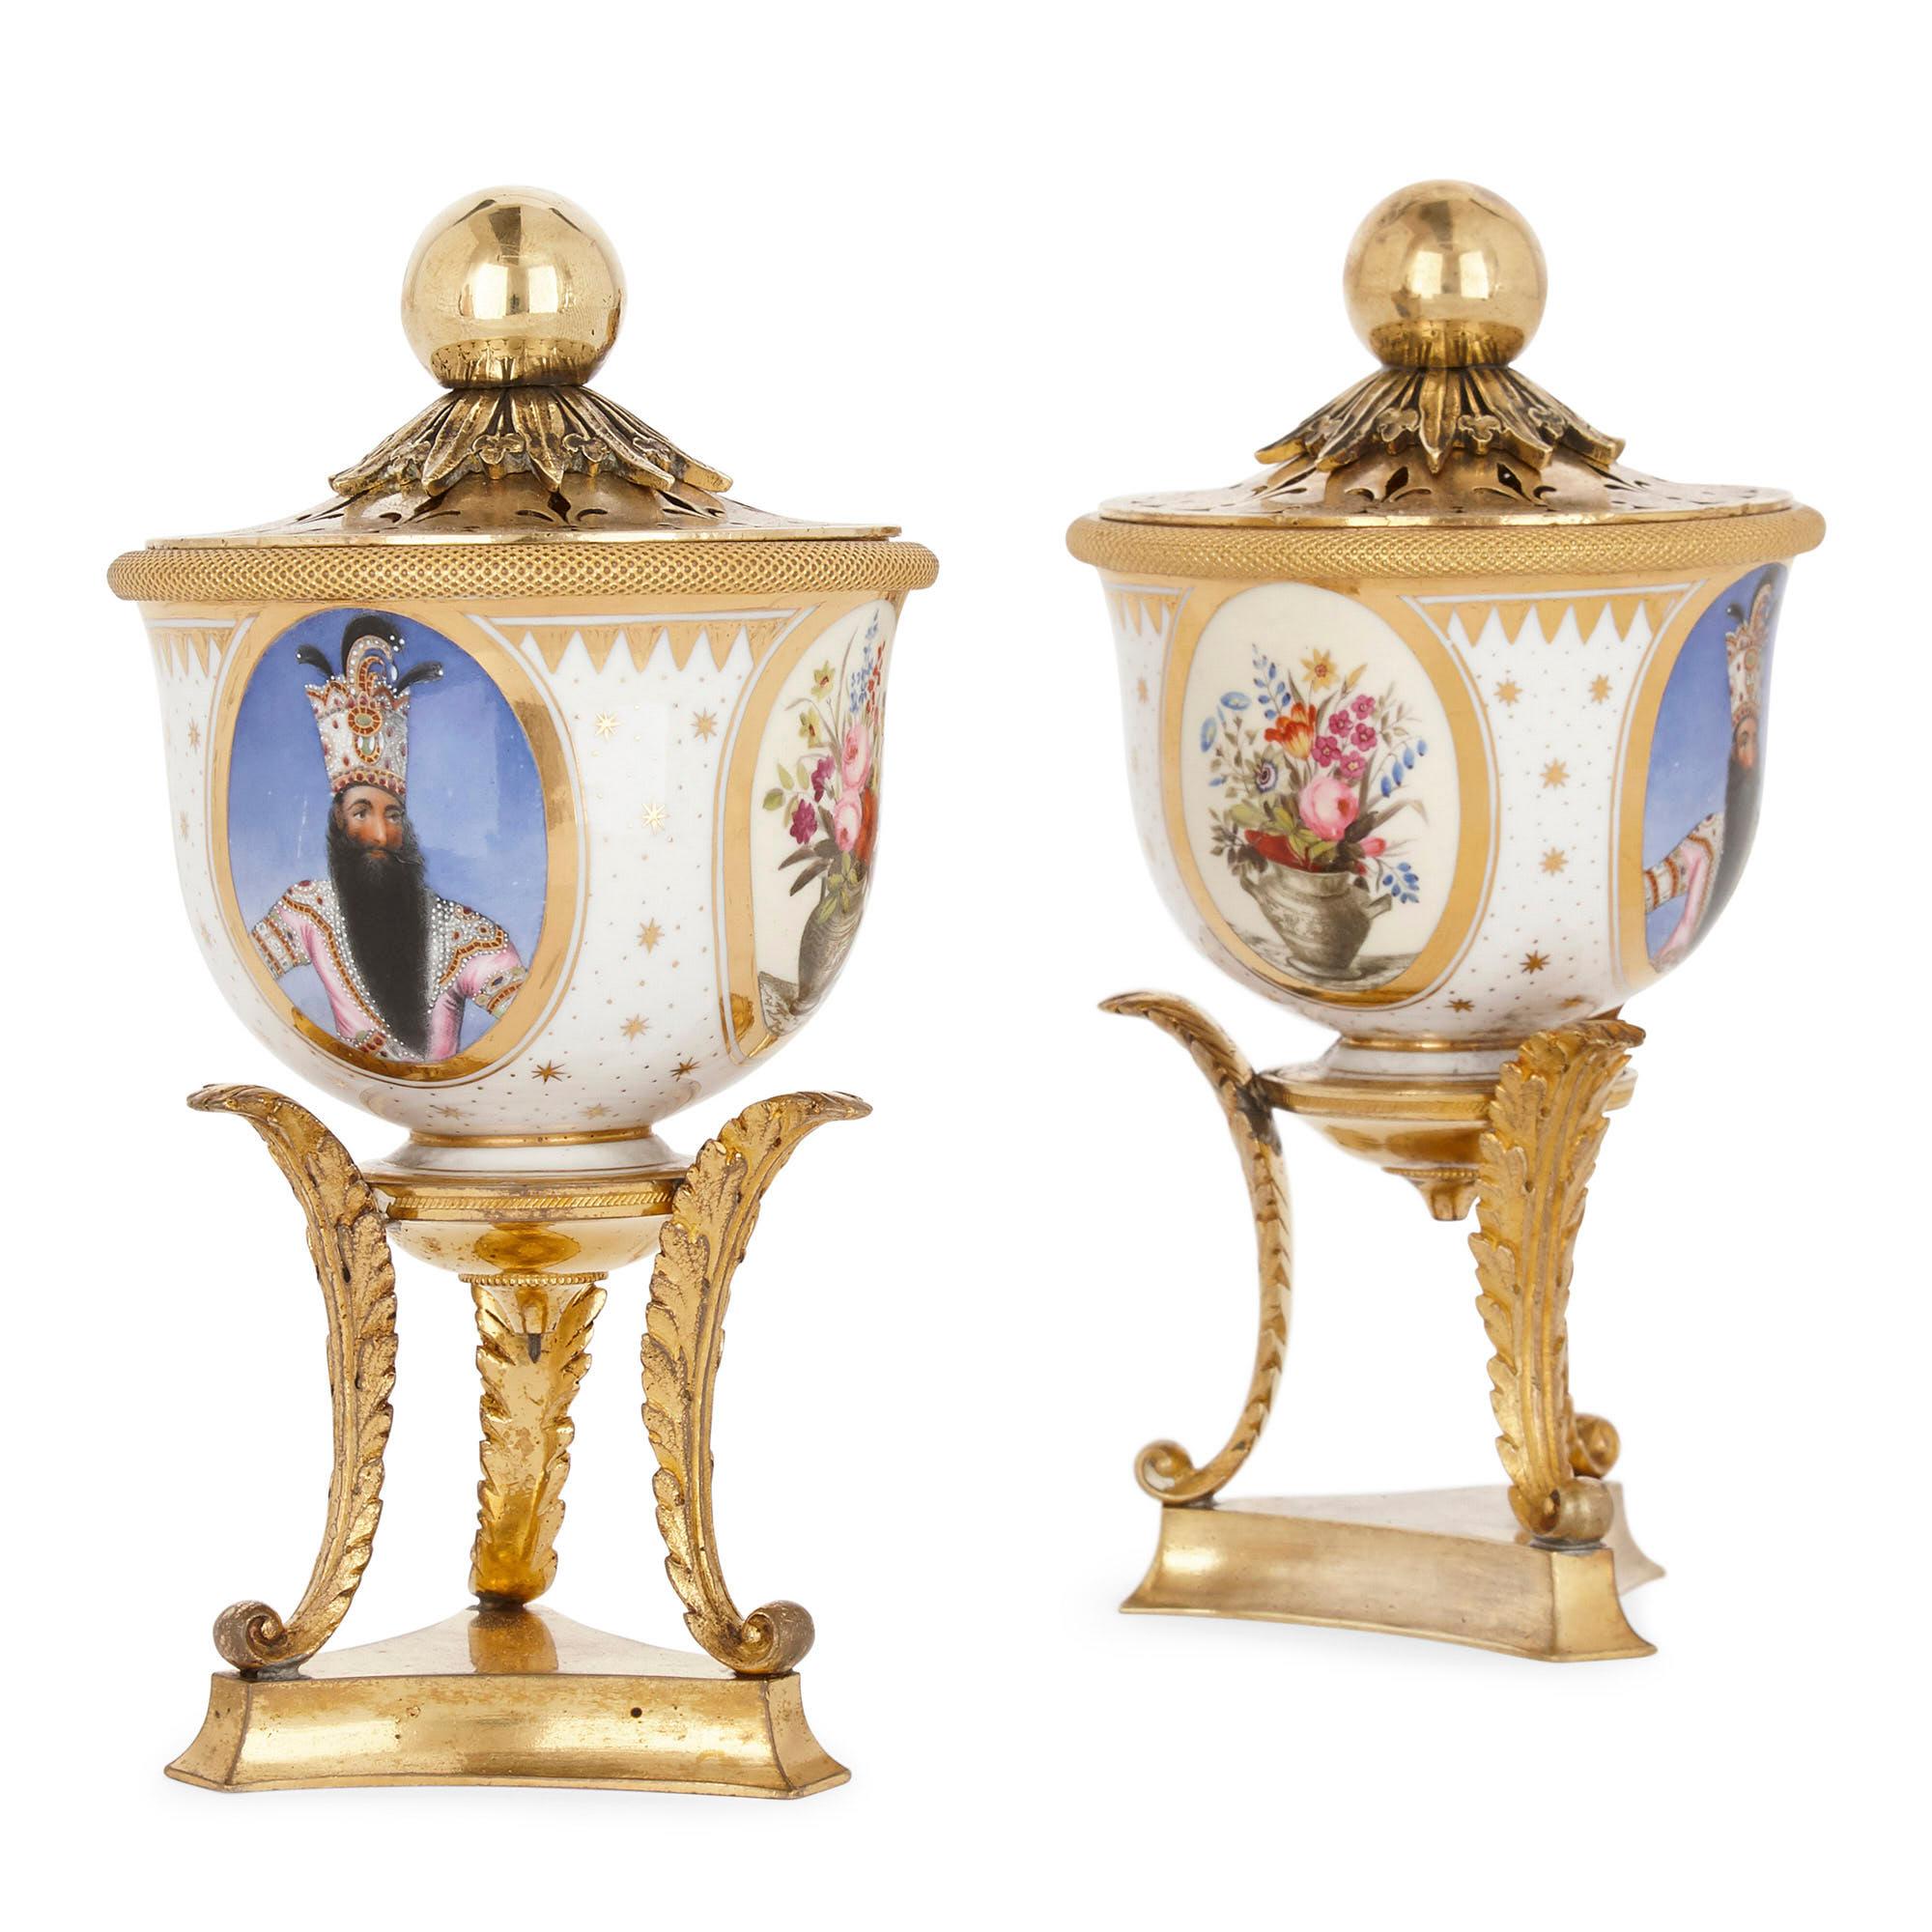 Produced by Royal Worcester, under the famed Flight, Barr & Barr partnership, this pair of porcelain tea bowls, transformed into potpourri vases by the later addition of a gilt bronze lid and stand, date to circa 1820 and demonstrate the very finest